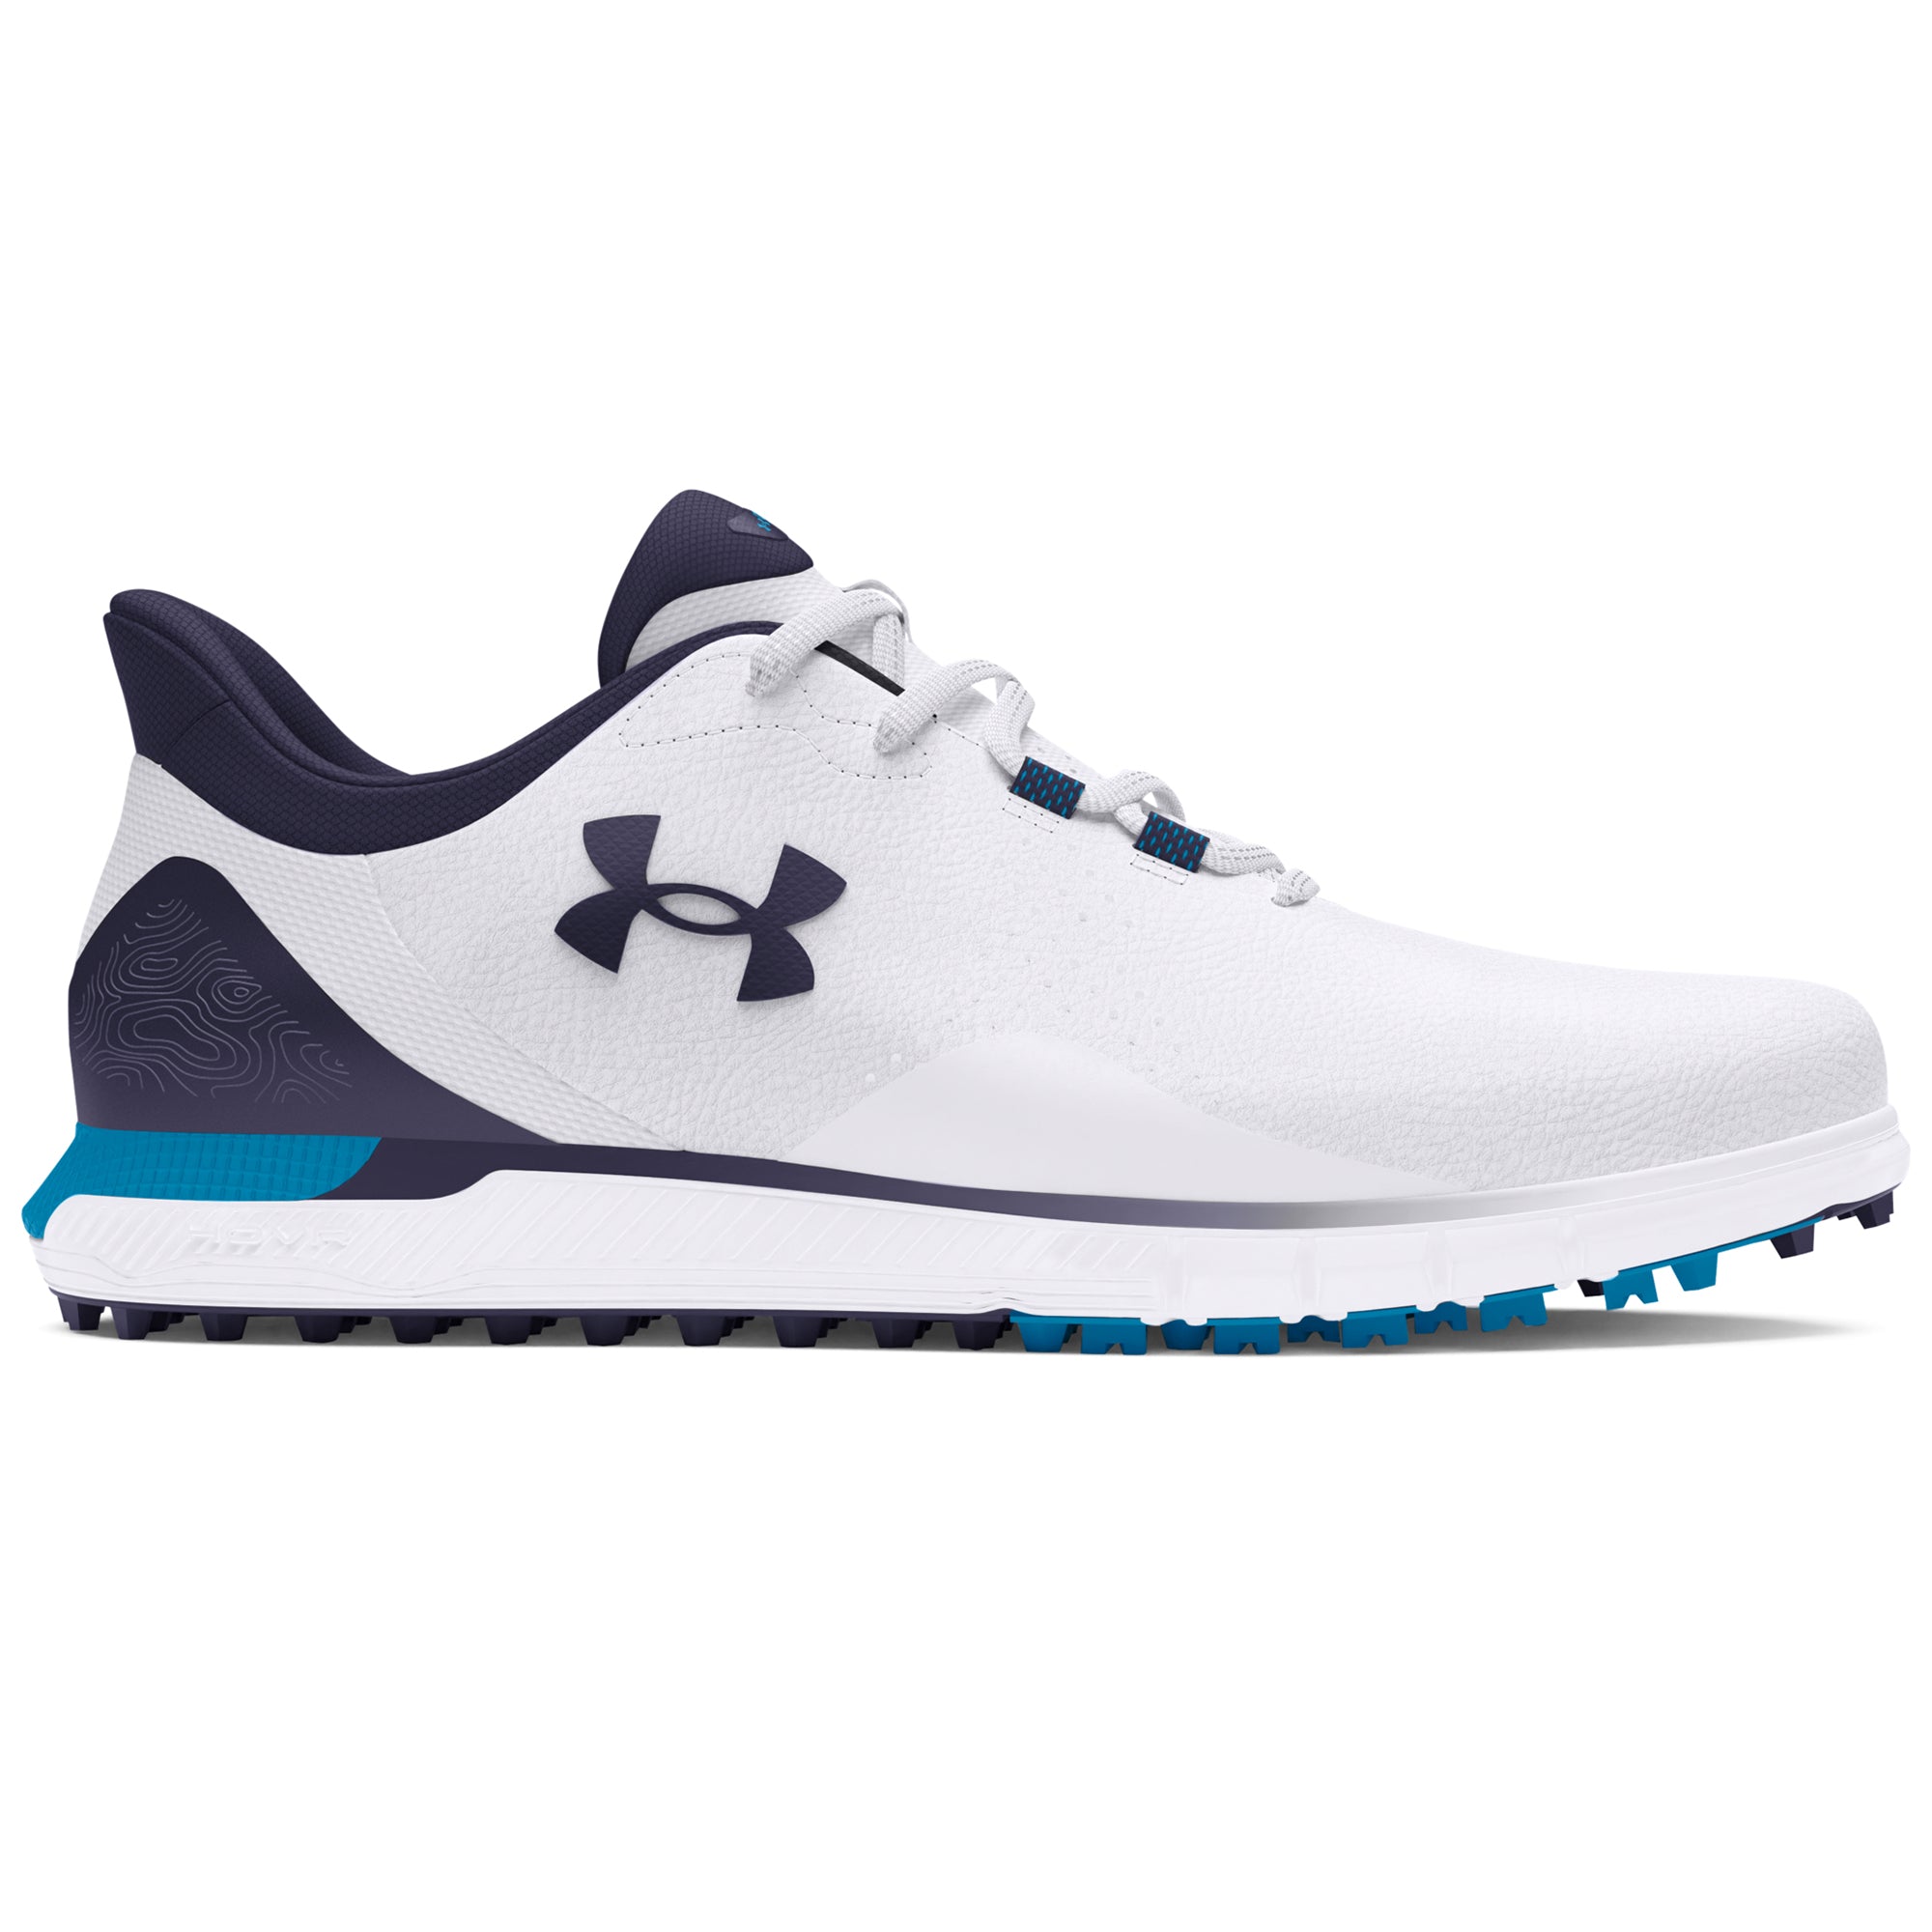 under-armour-drive-fade-sl-golf-shoes-3026922-white-capri-midnight-navy-101